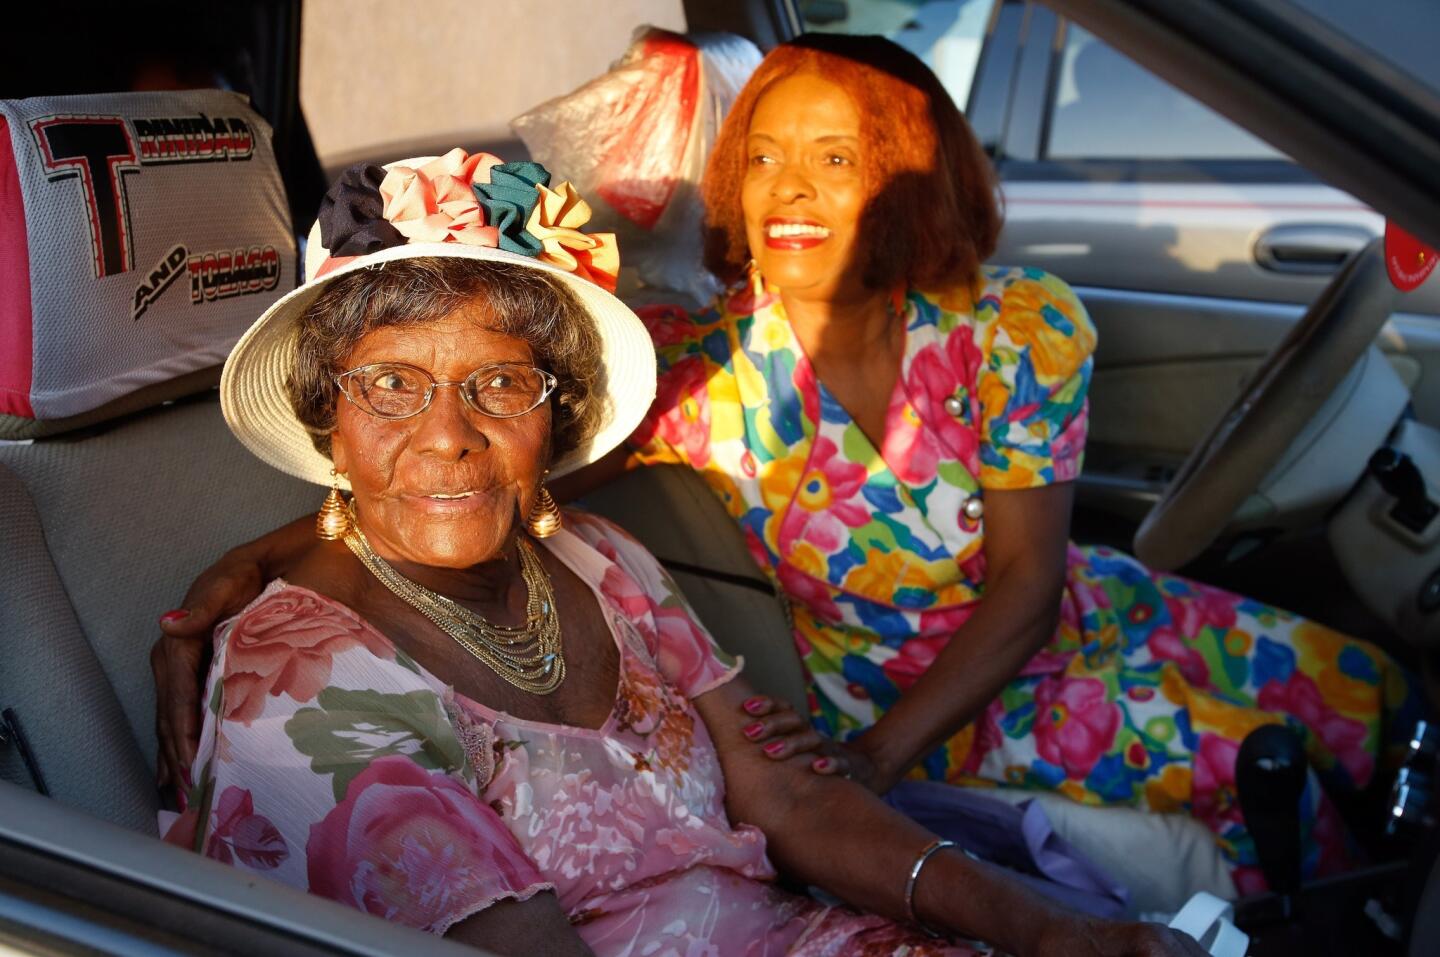 Emelia De-Four, 99, waits in the parking lot with her daughter Ruphina Allen, 74, before going on a shopping spree at the 99 Cents Only store in Paramount on Friday. De-Four recently turned 99.